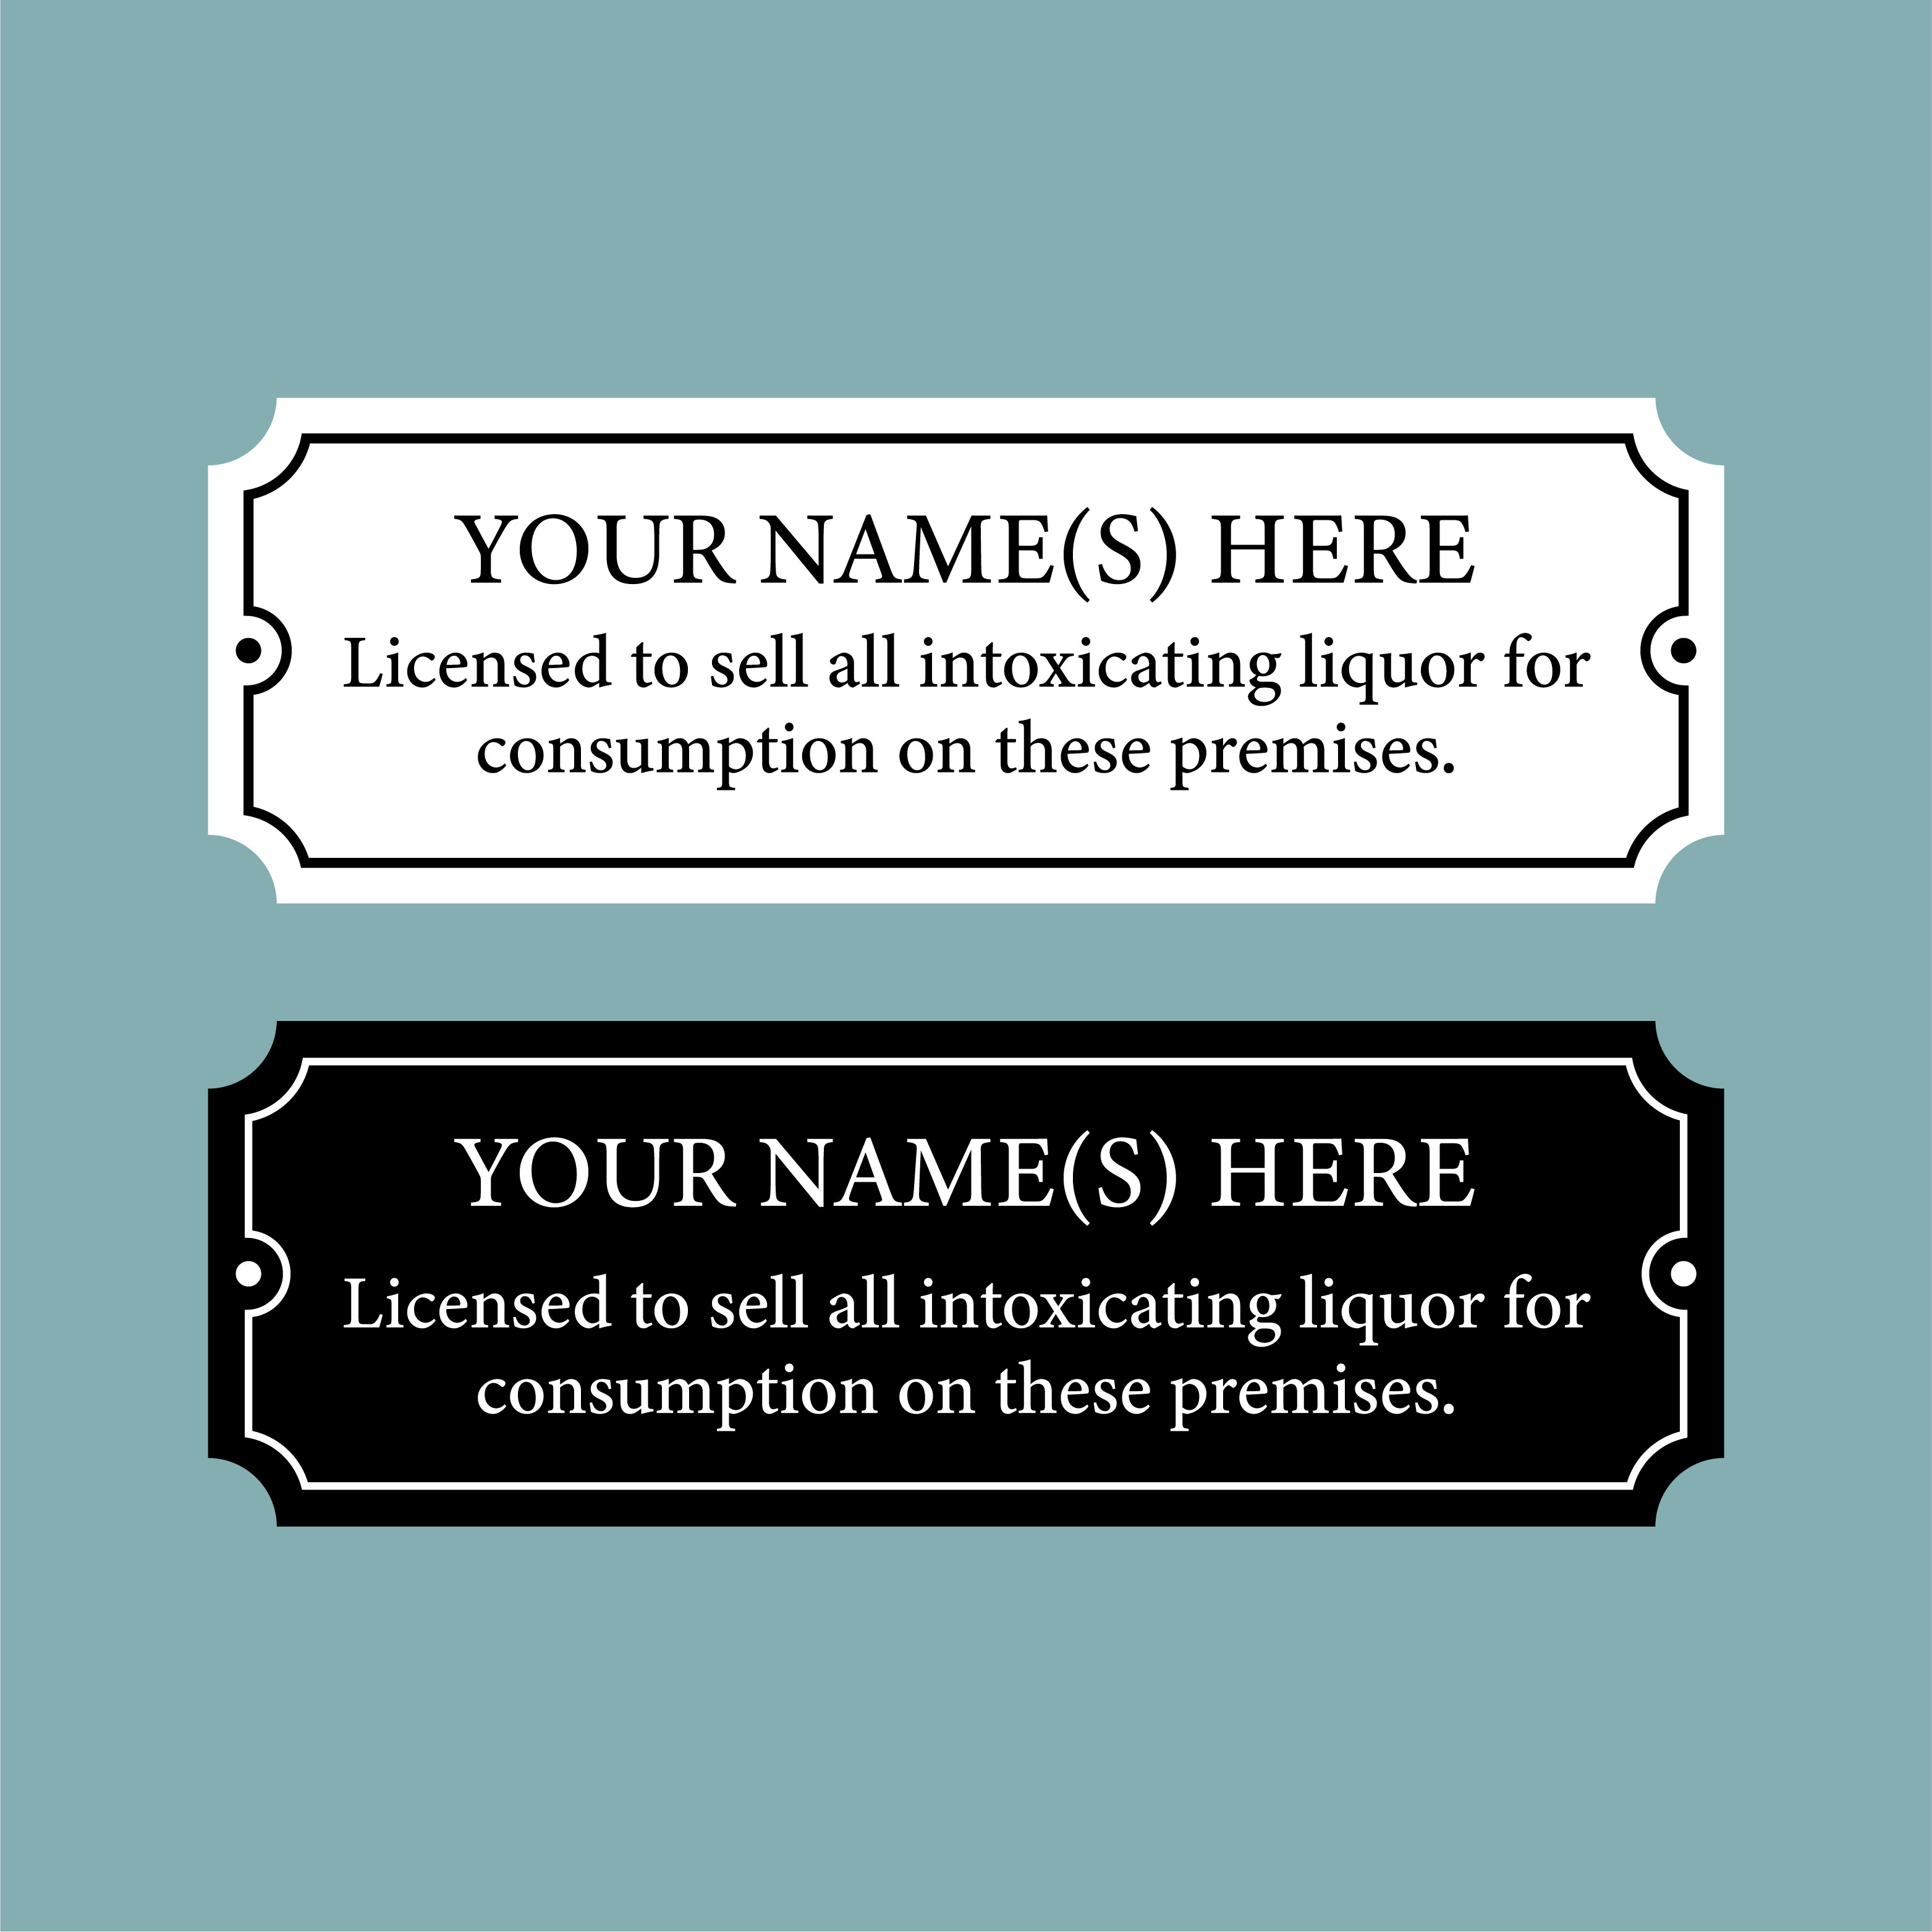 Pub Licensee Sign License Plates Catersigns